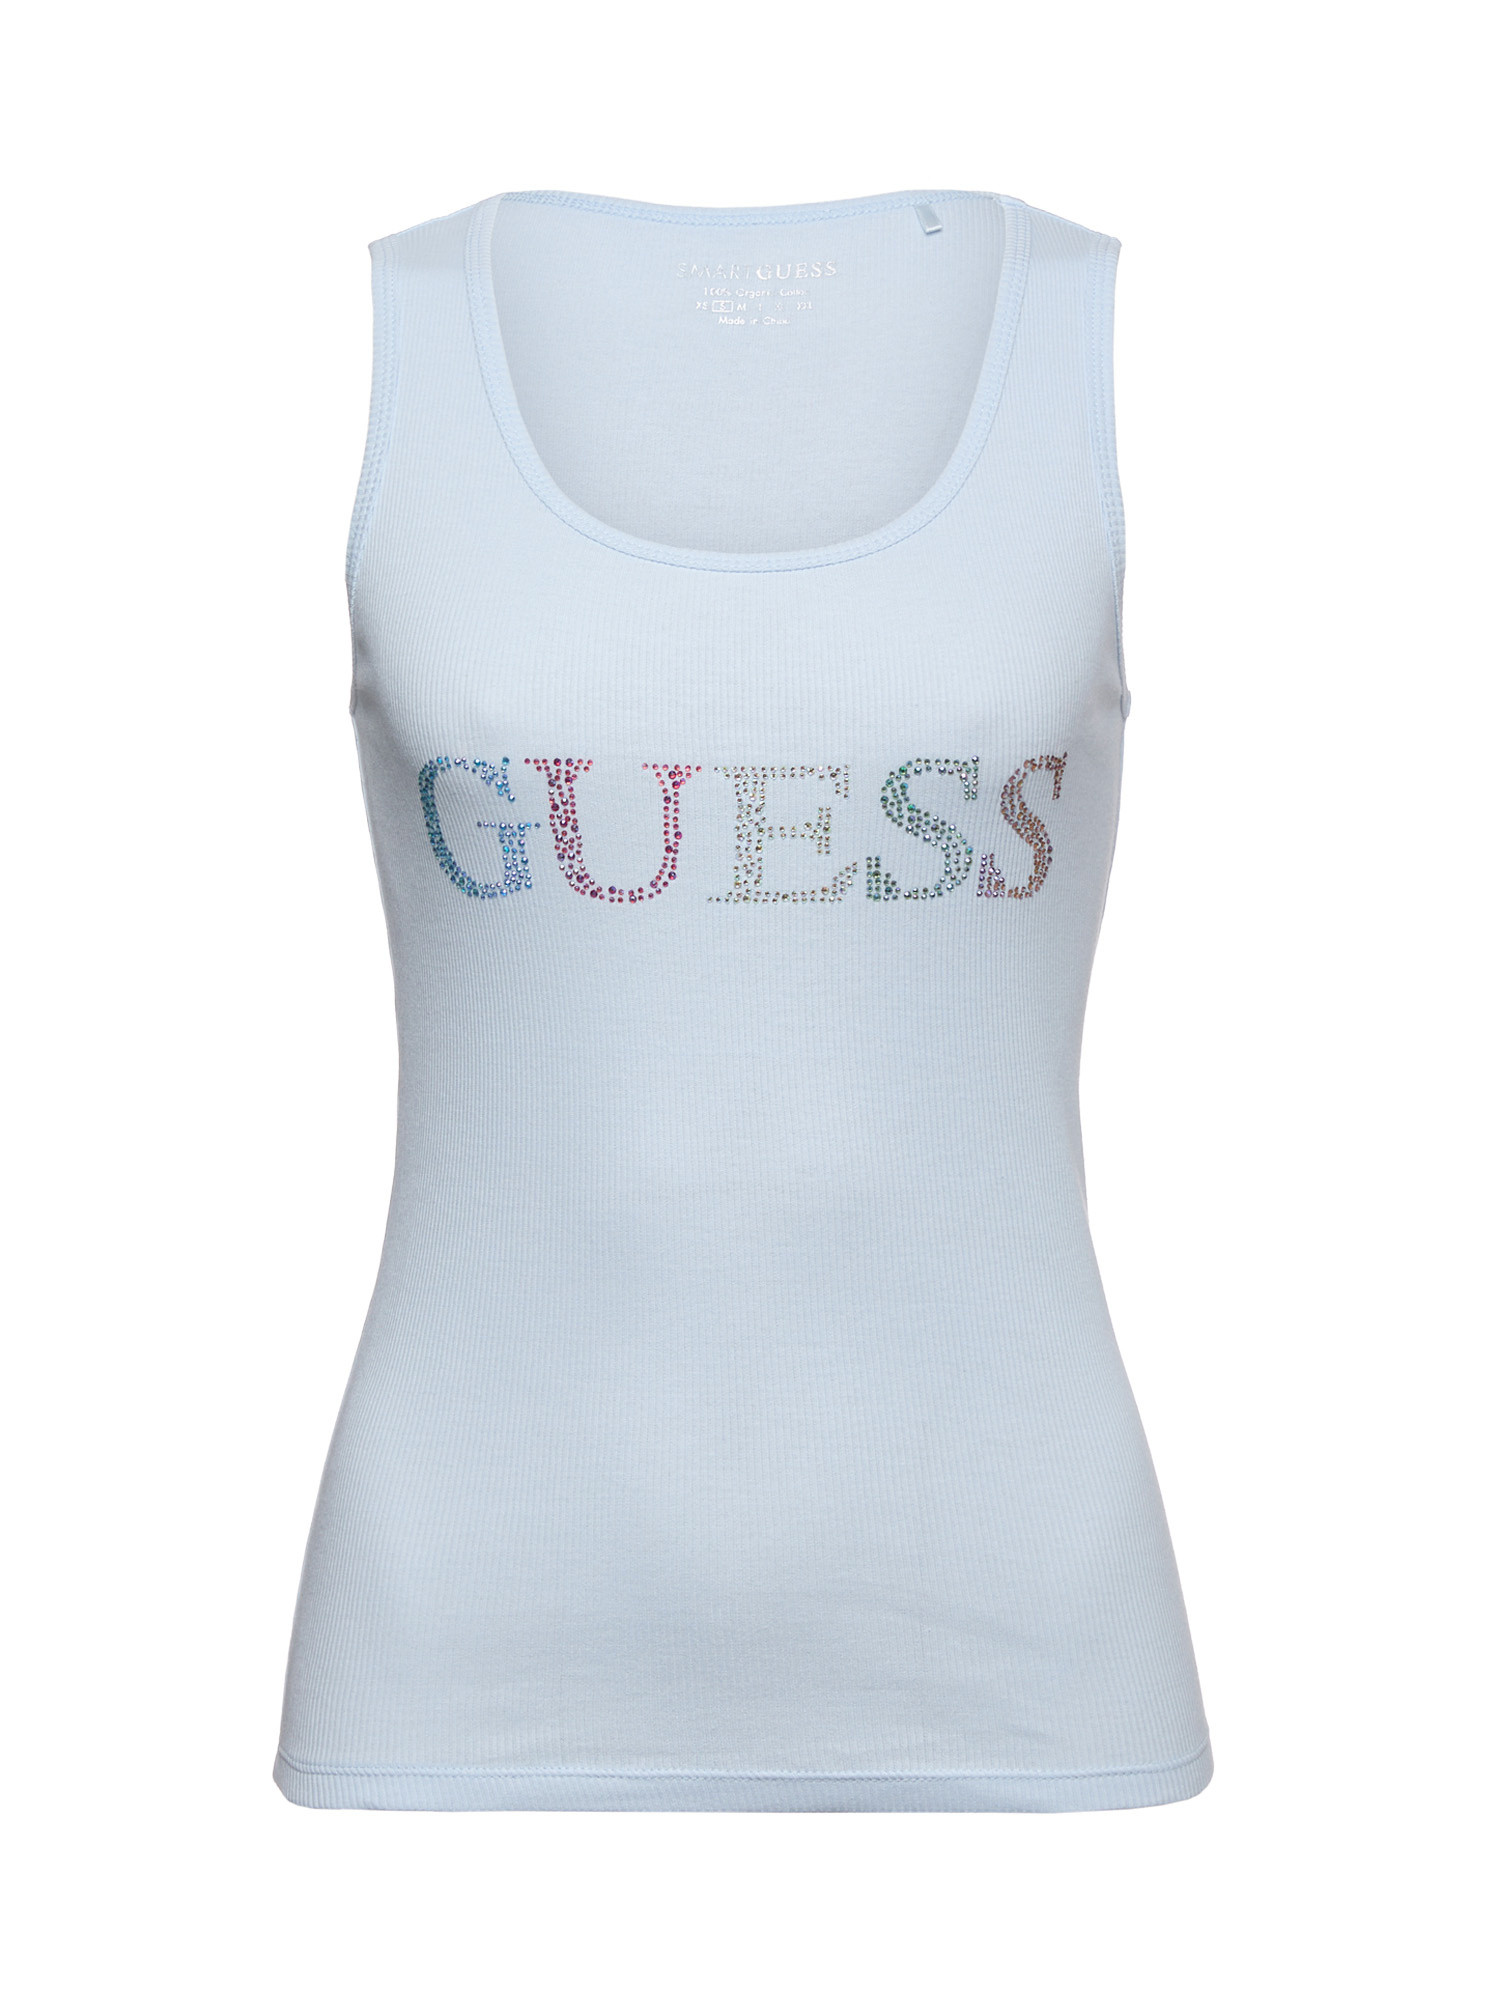 GUESS - Canotta in cotone con logo, Azzurro, large image number 0